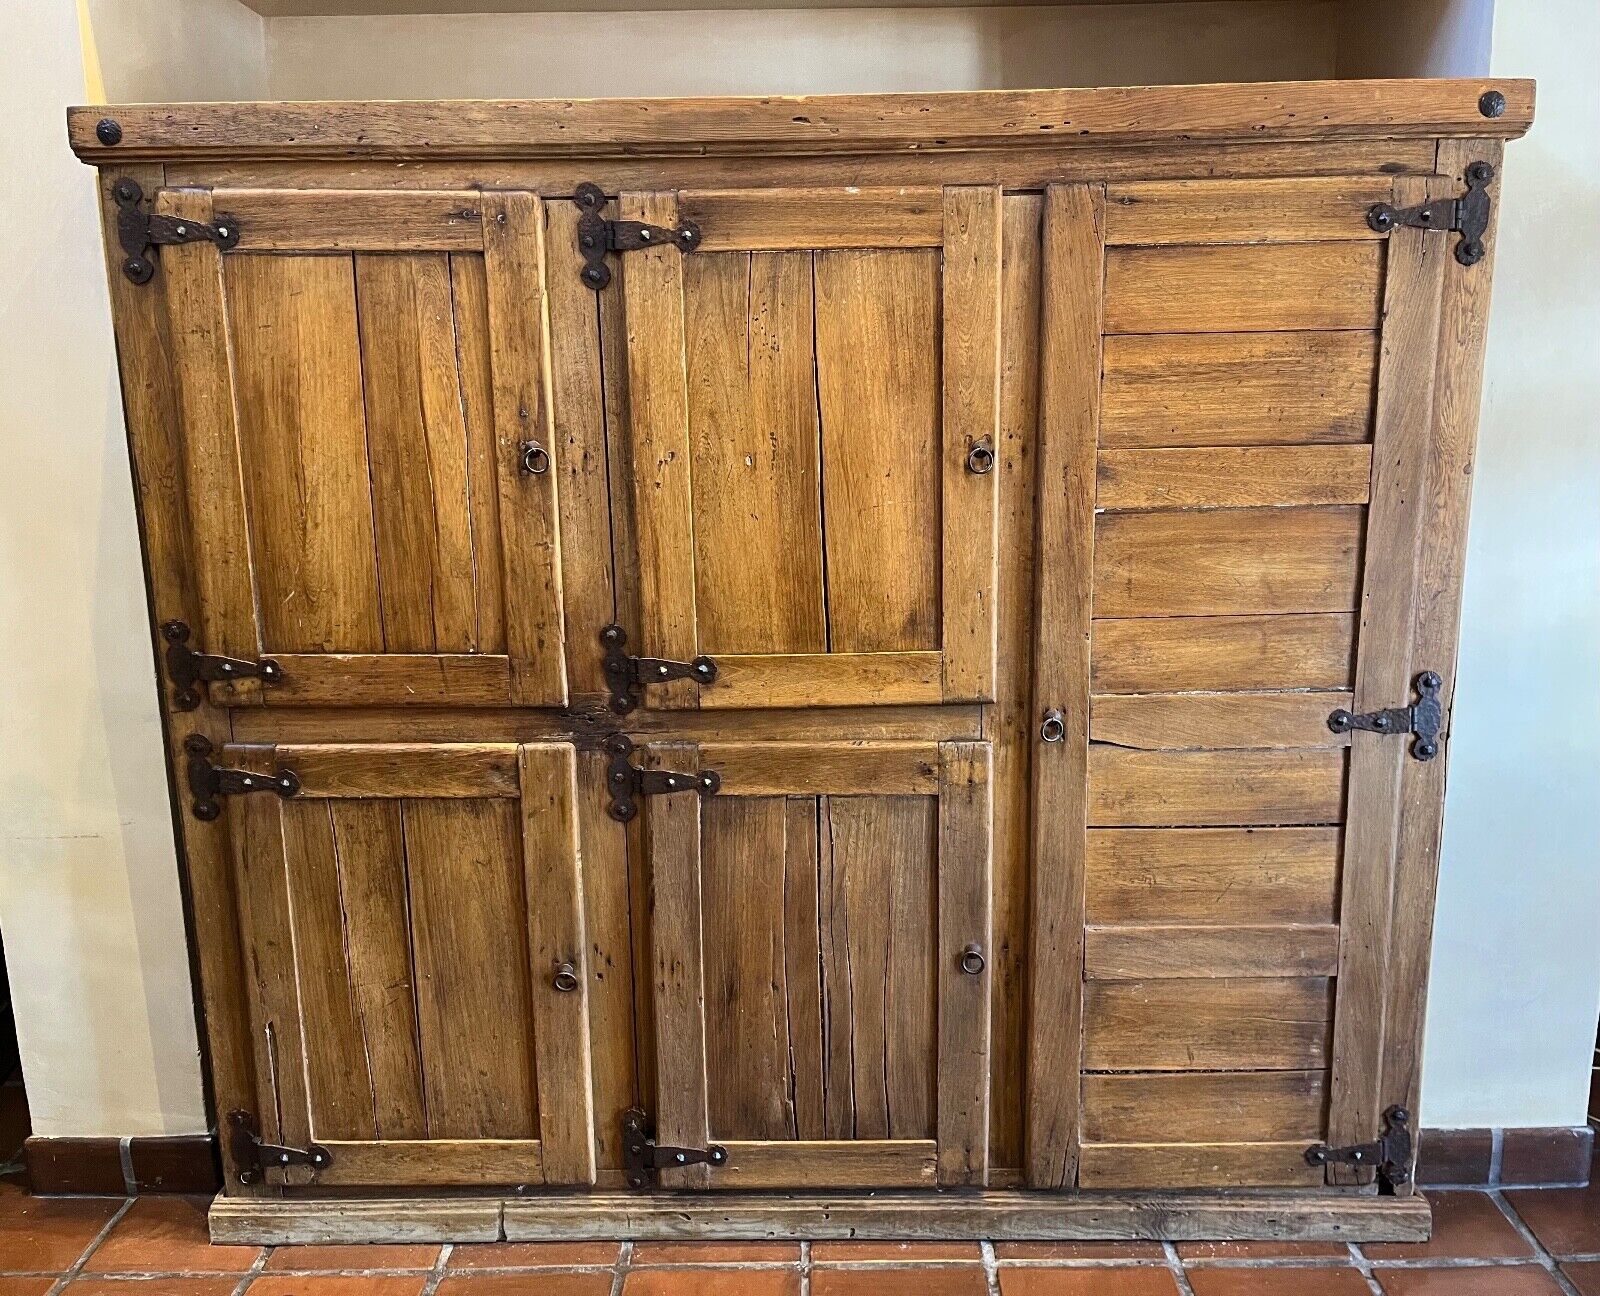 Early 1900s Large Wooden Ice Box Converted to Wine Storage